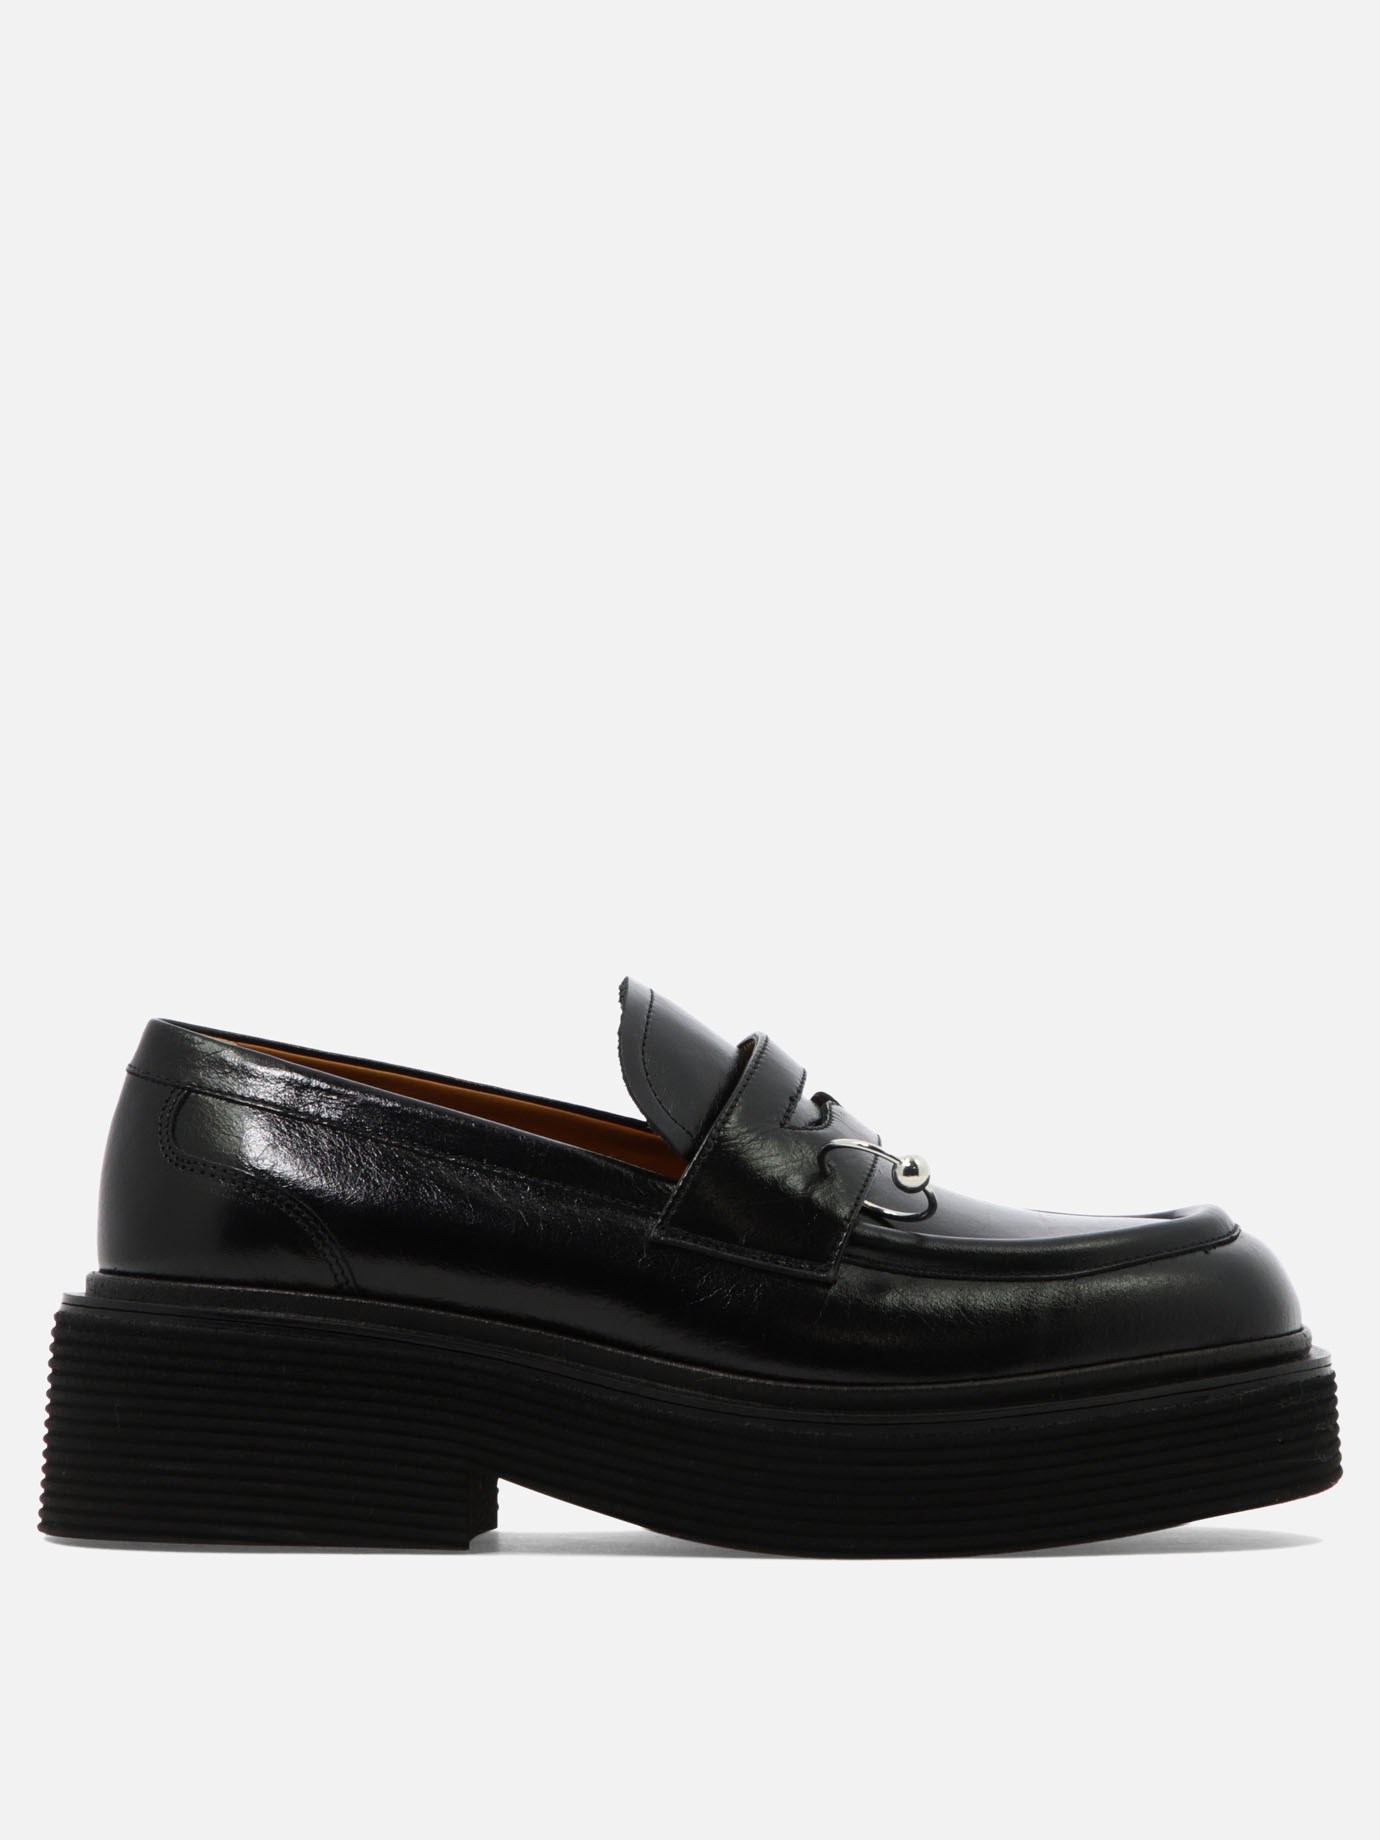  Piercing  loafersby Marni - 2